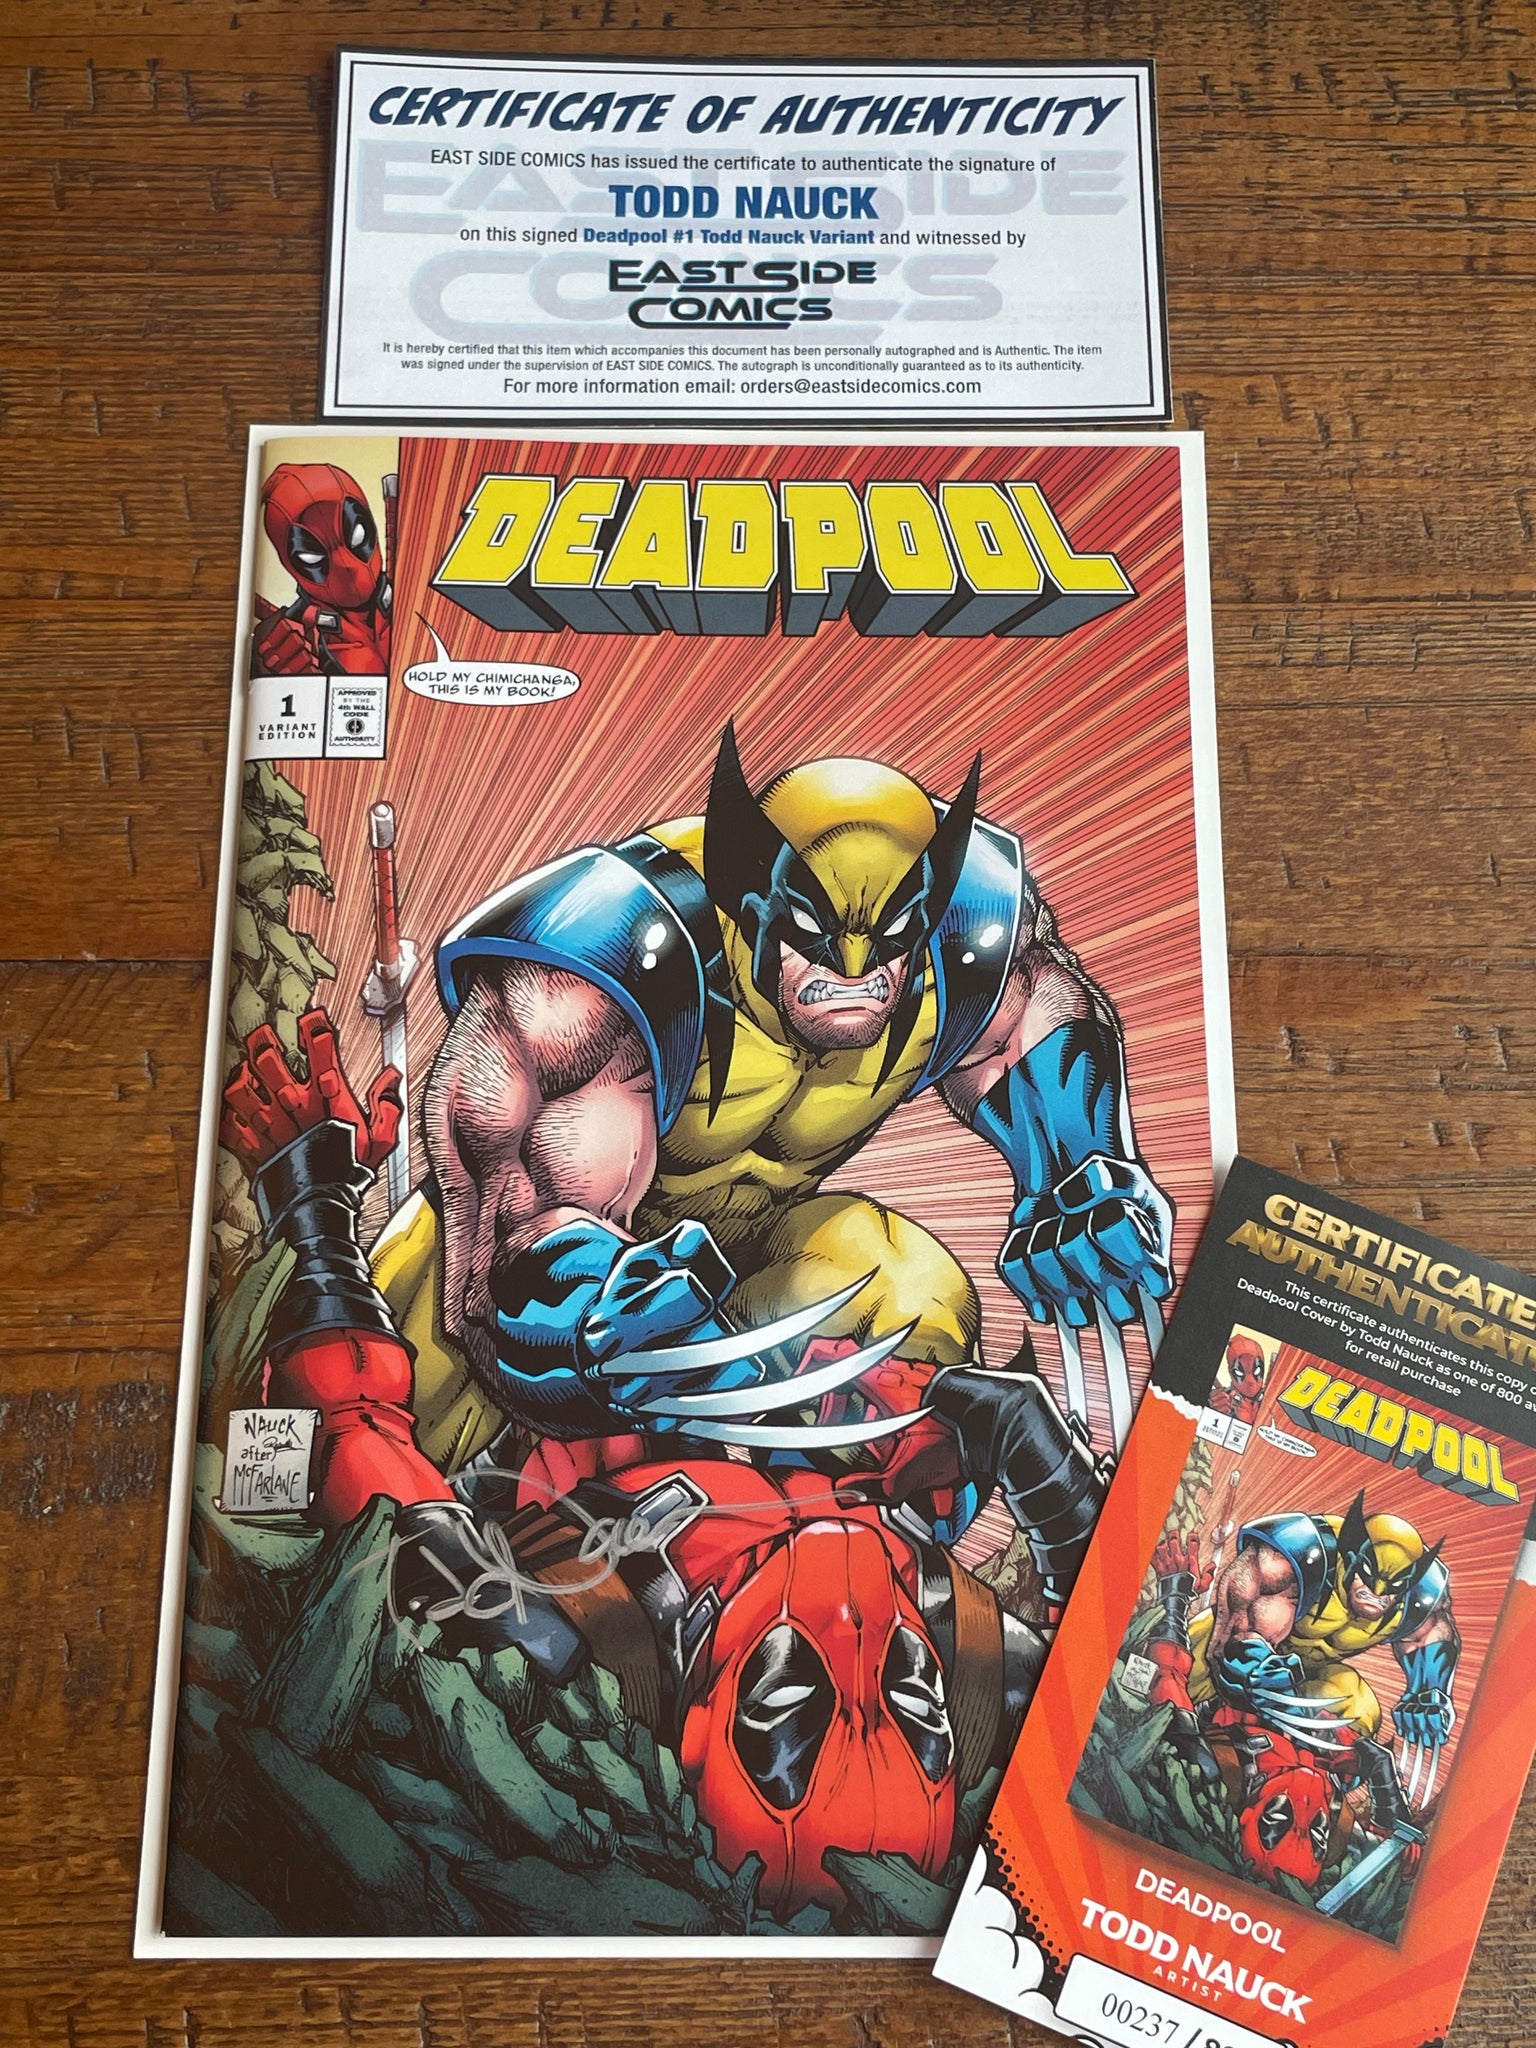 DEADPOOL #1 TODD NAUCK SIGNED WOLVERINE EXCL HOMAGE VARIANT LTD TO 800 W/ COA